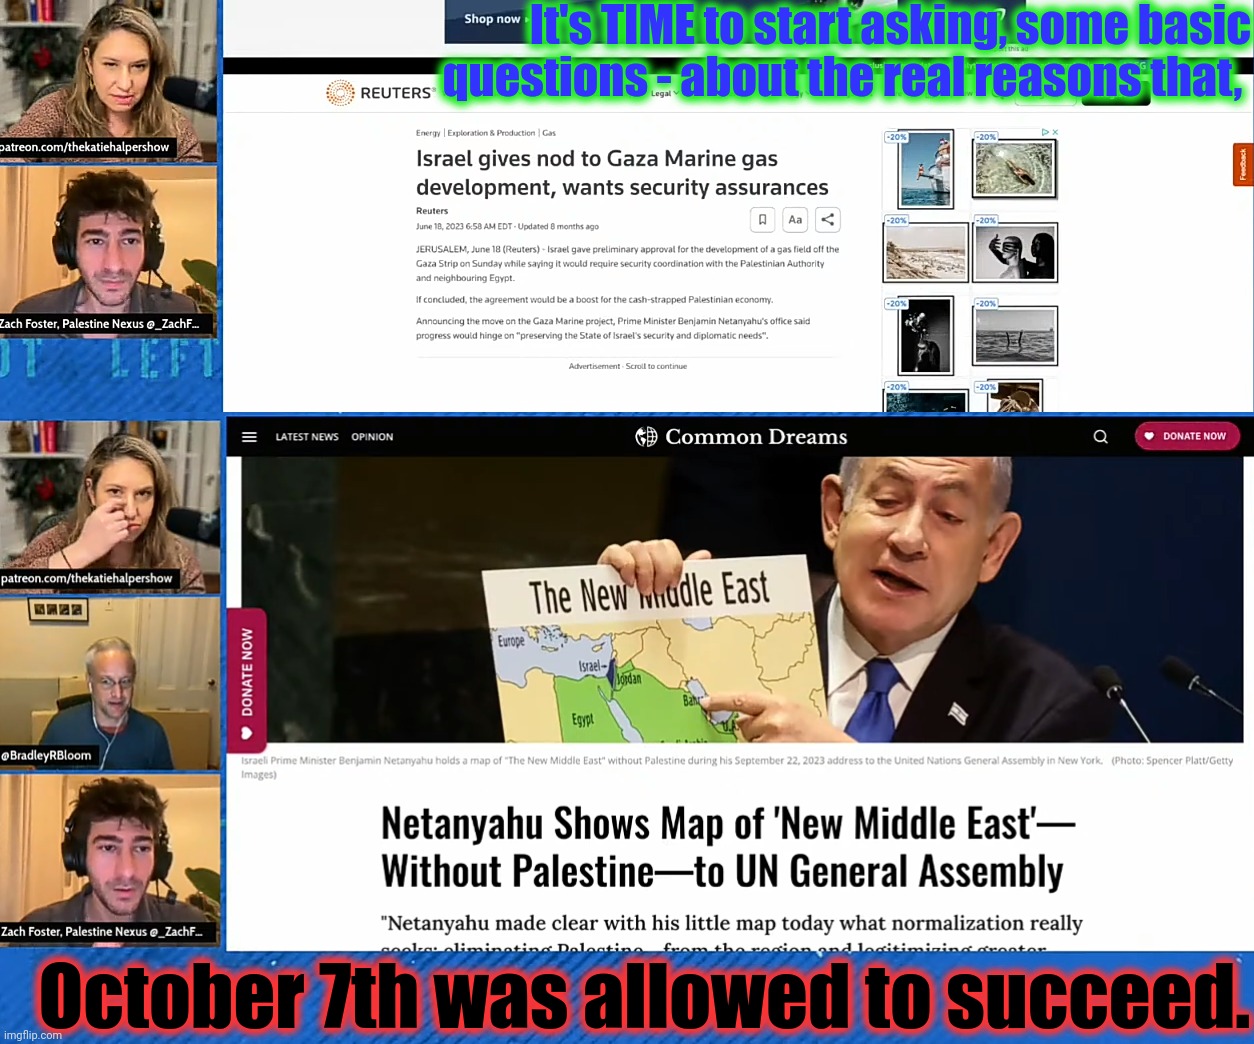 There's absolutely no plausible way to deny, that October 7th was ALLOWED TO HAPPEN. | It's TIME to start asking, some basic questions - about the real reasons that, October 7th was allowed to succeed. | image tagged in lihop vs mihop vs conspiracy theory,conspiracy theory is a just a cover for covert operations,10/7 was an inside job,memes | made w/ Imgflip meme maker